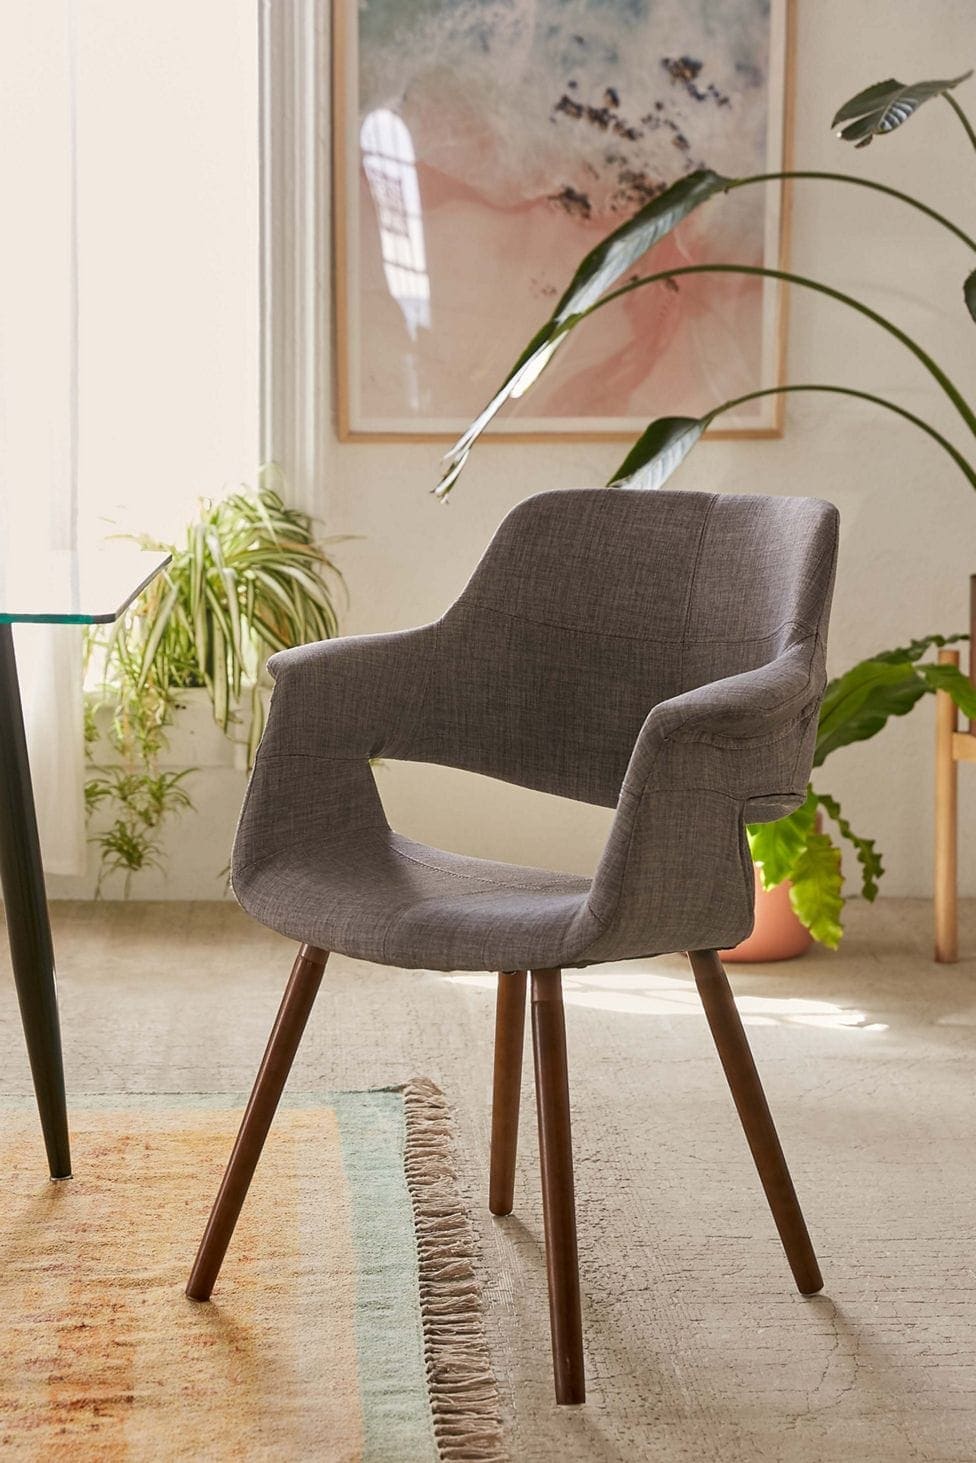 Add Style to Your Room with This Sleek Mid Century Modern Chair